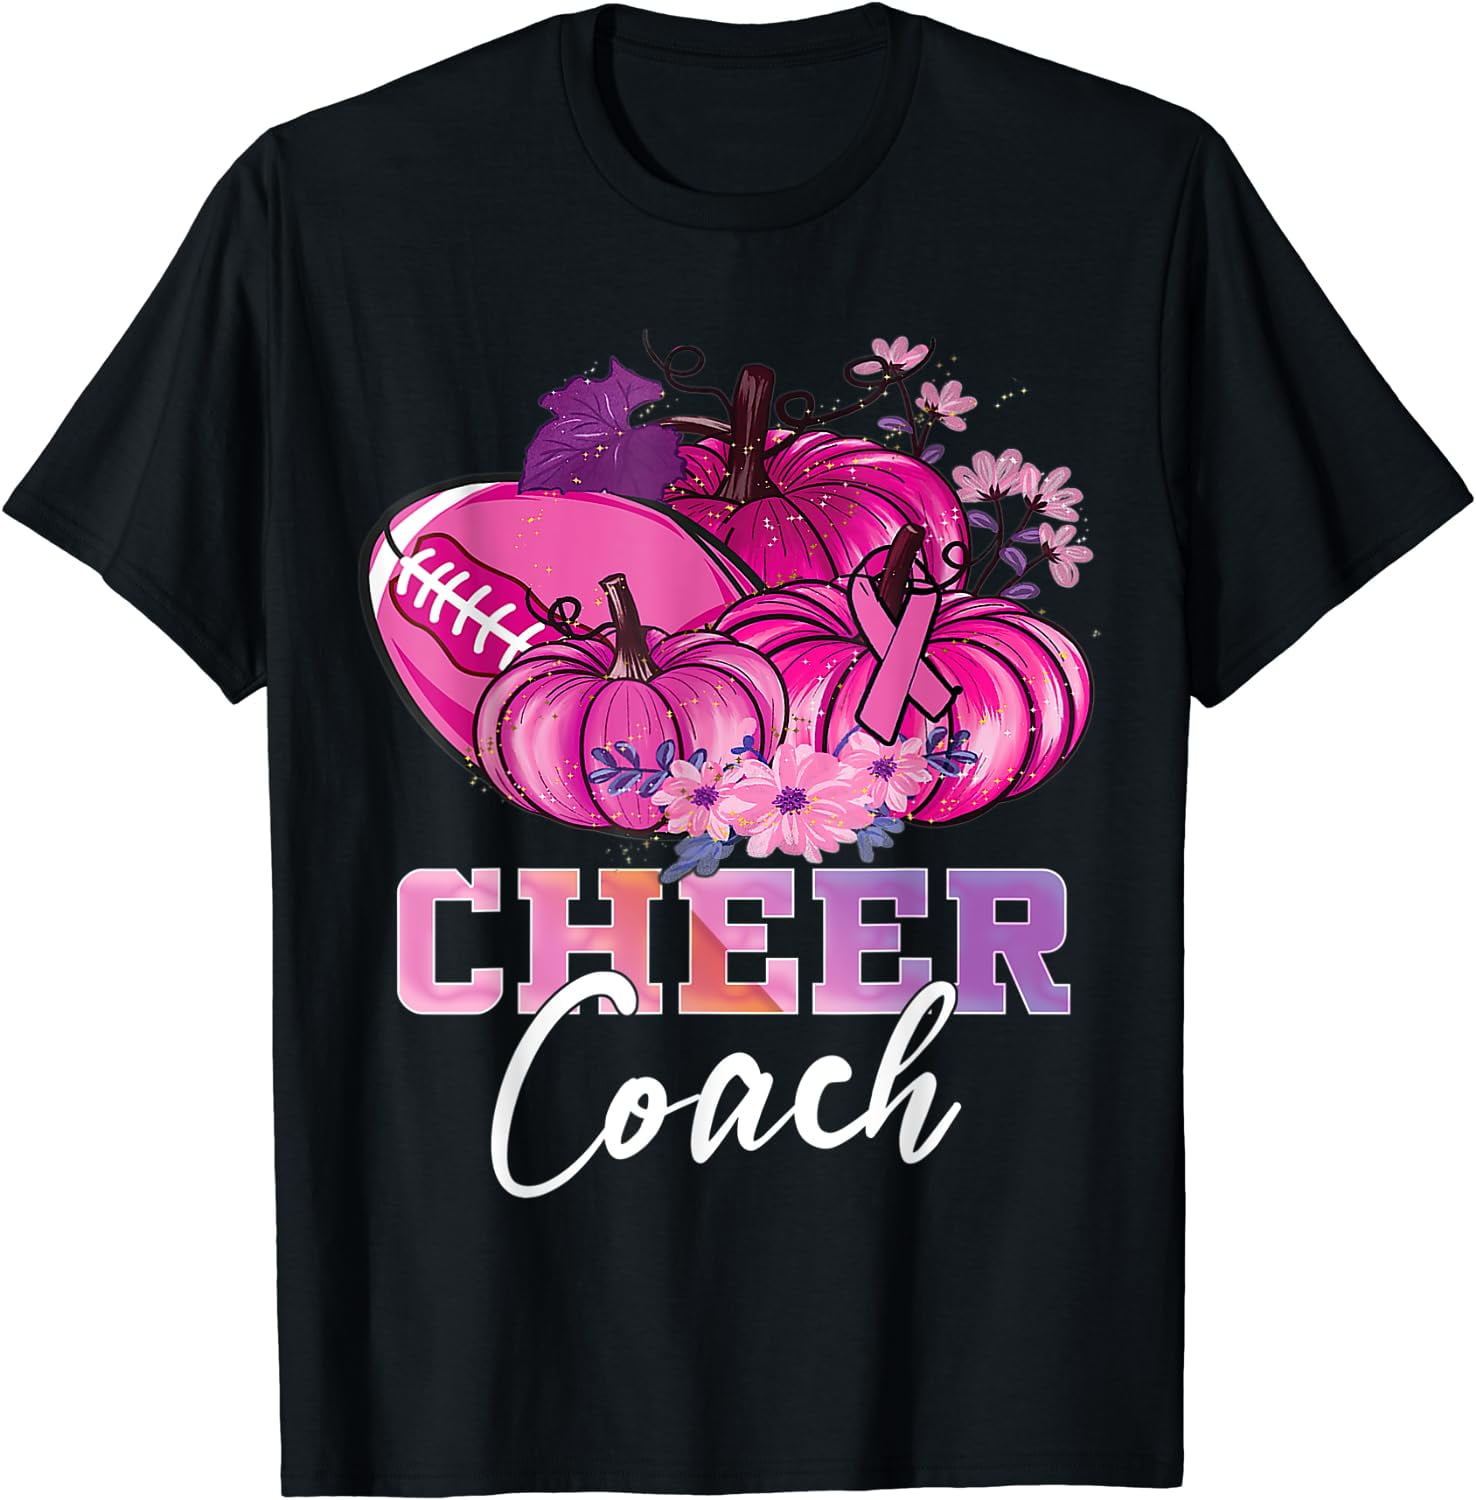 Breast Cancer Awareness Football Jersey / Women's Relaxed 